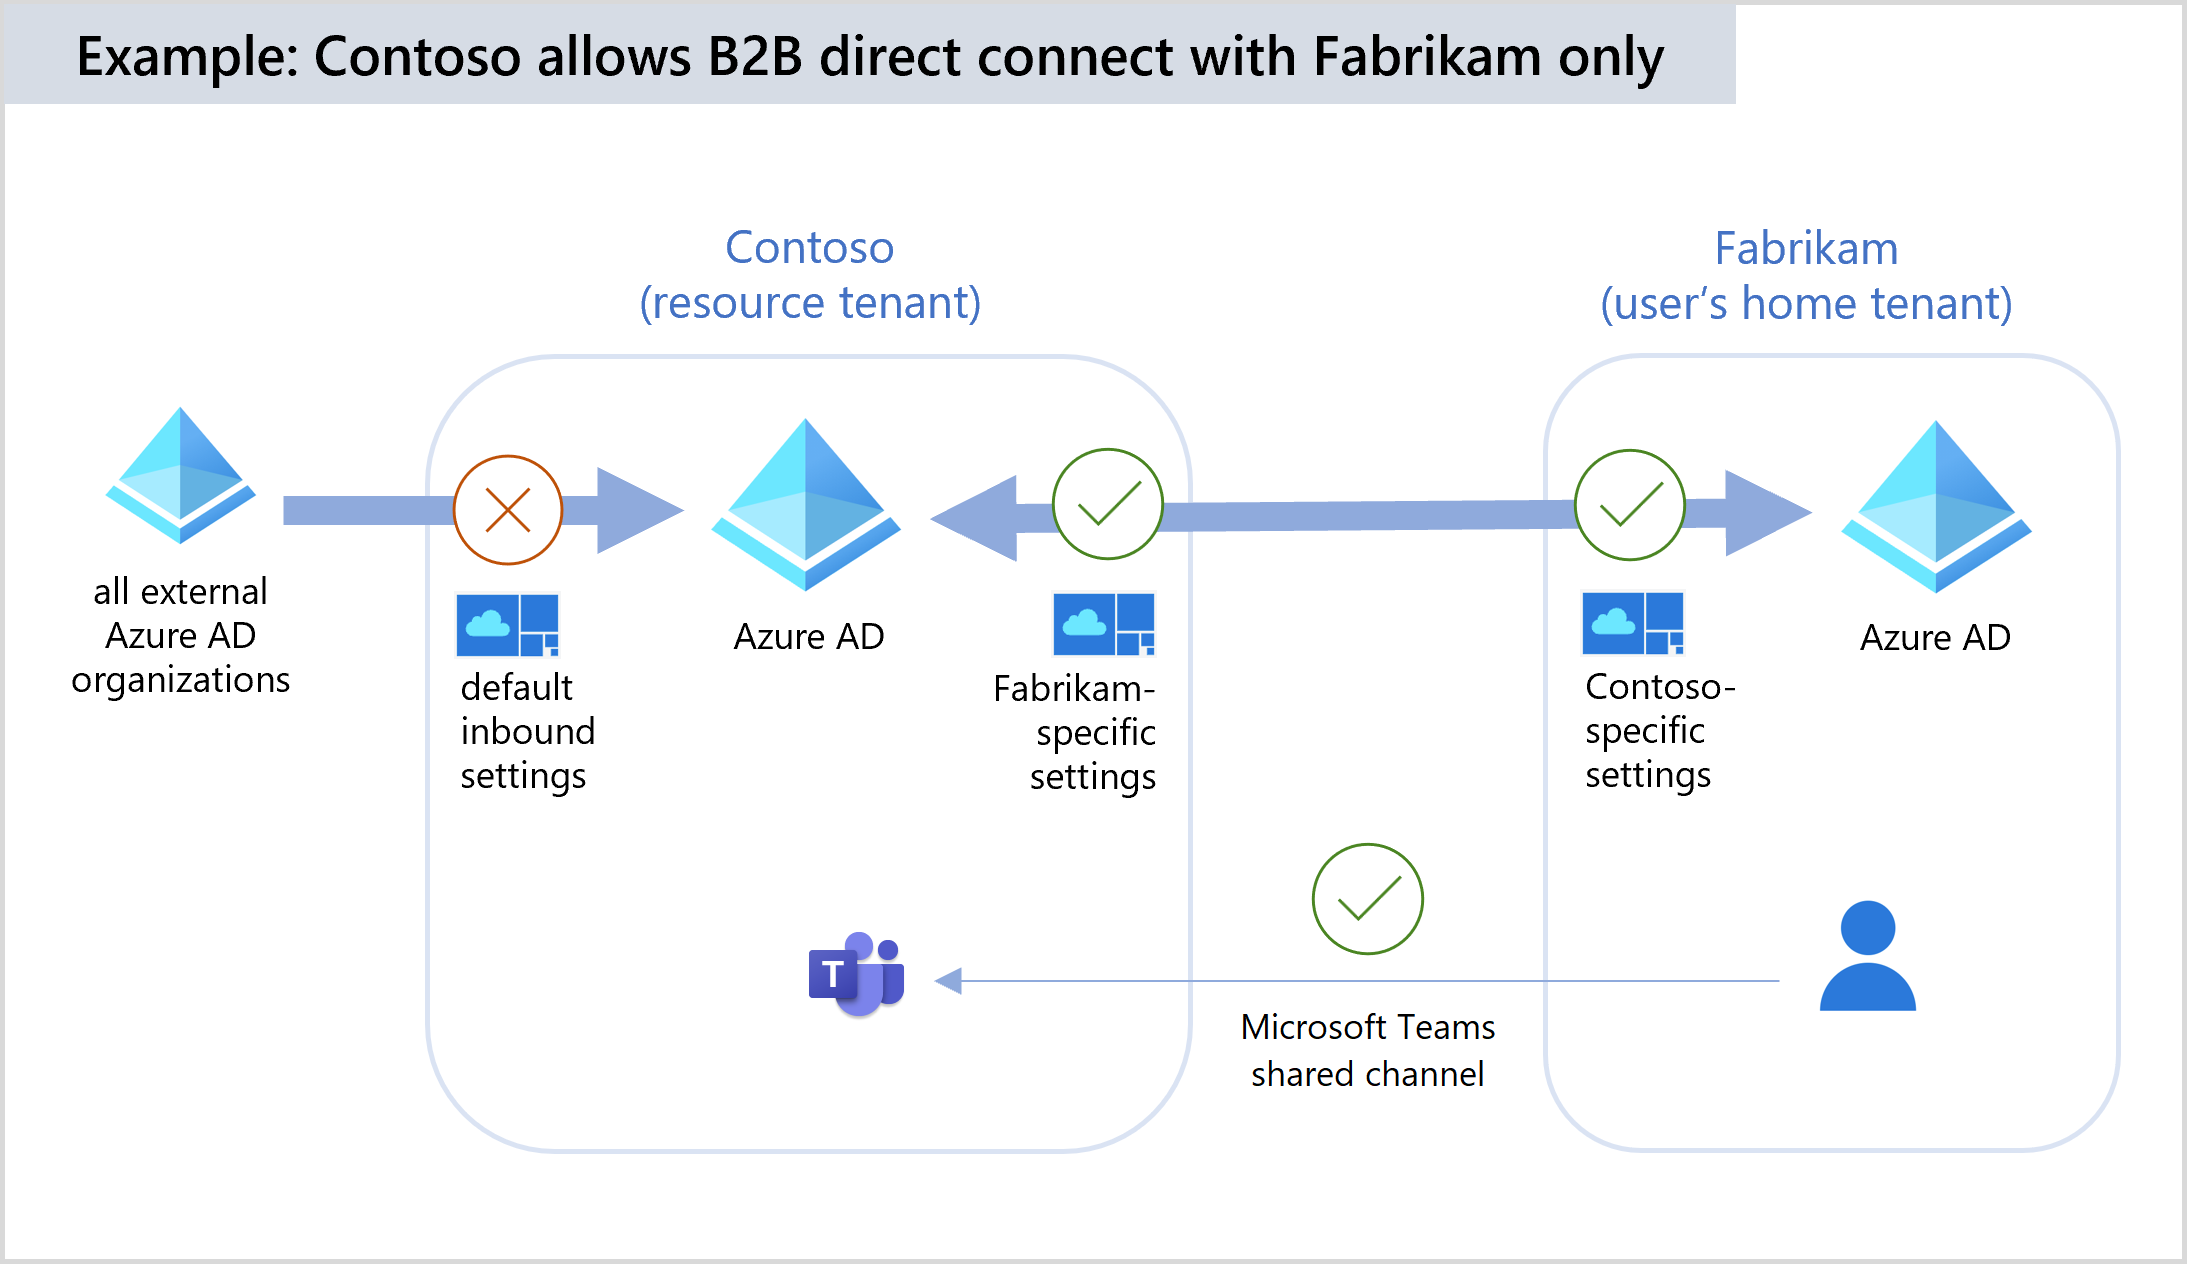 Example of blocking B2B direct connect by default but allowing an org.